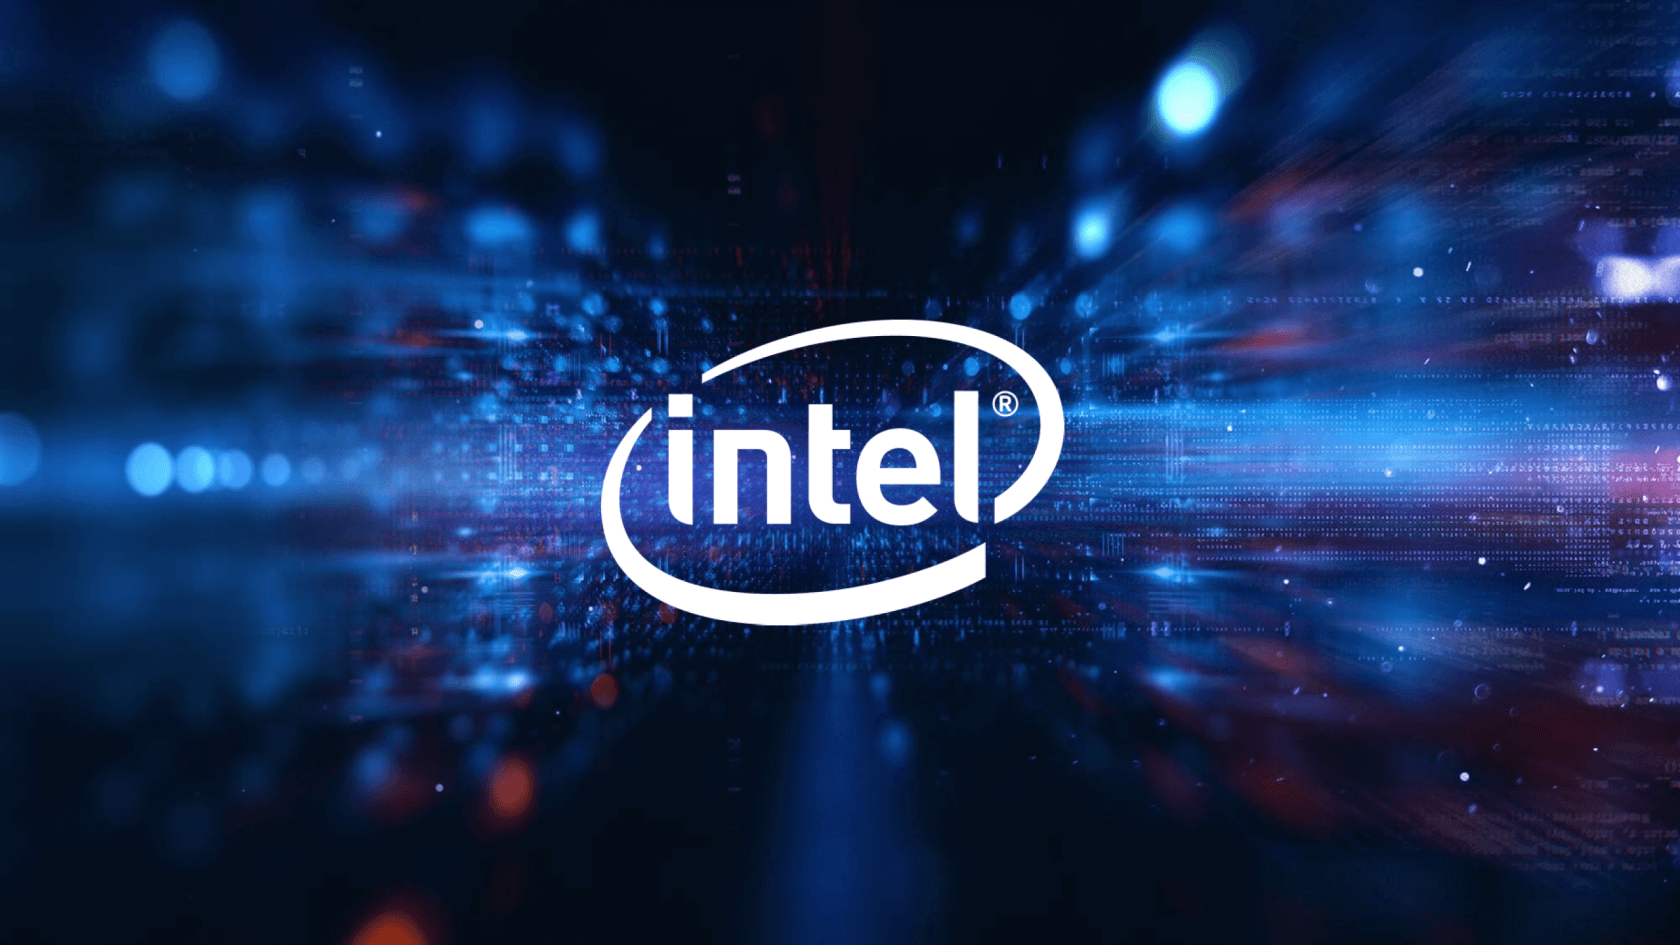 Recent benchmark submission shows Intel's upcoming Core i3 will have Hyper-Threading